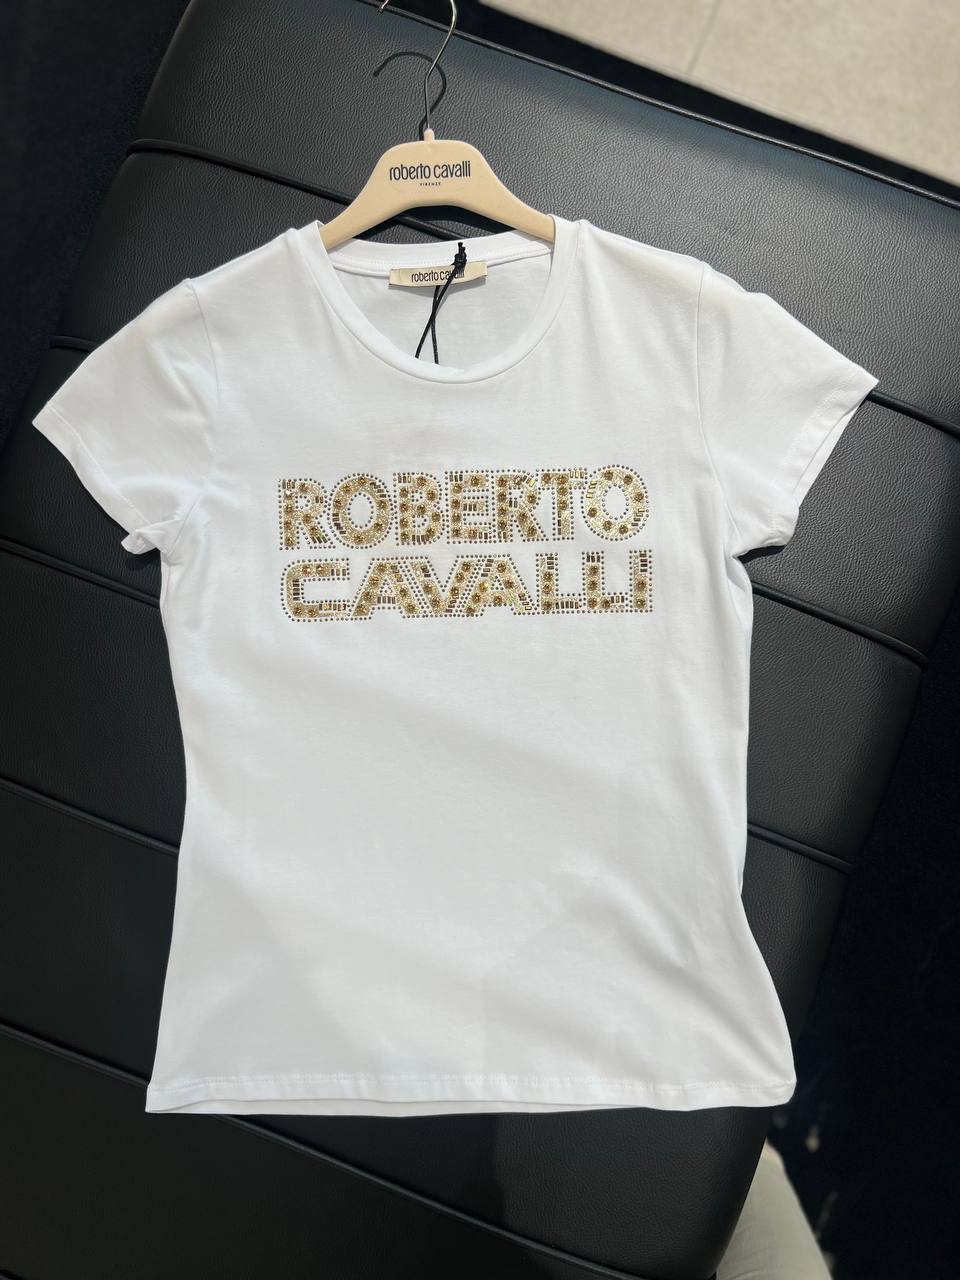 Roberto Cavalli Outlets 5011